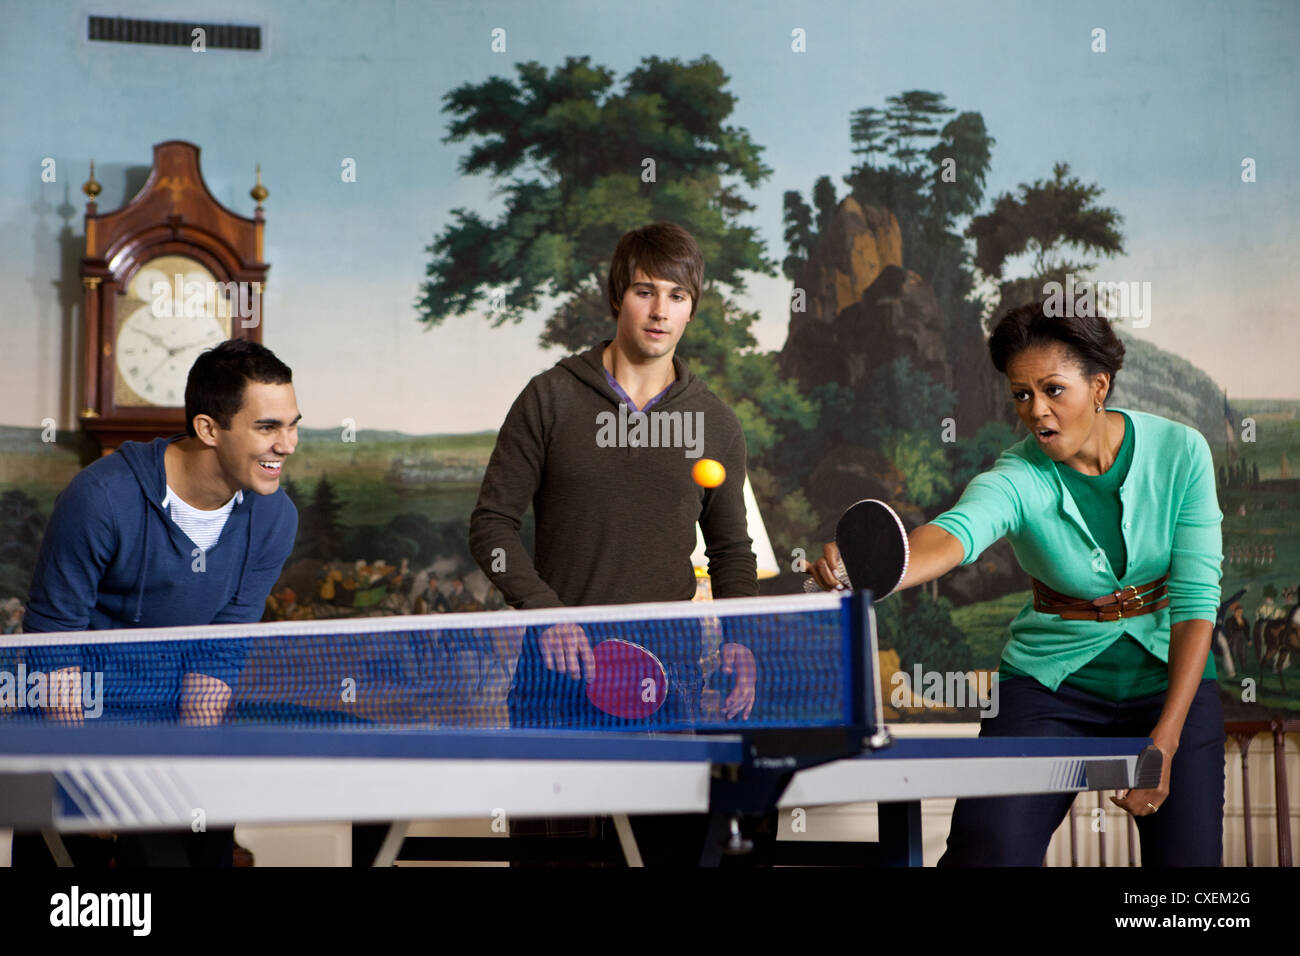 First Lady Michelle Obama plays table tennis with members of the band Big Time Rush September 24, 2011 in the Diplomatic Reception Room of the White House during a taping for NIckelodeon's Worldwide Day of Play. Stock Photo